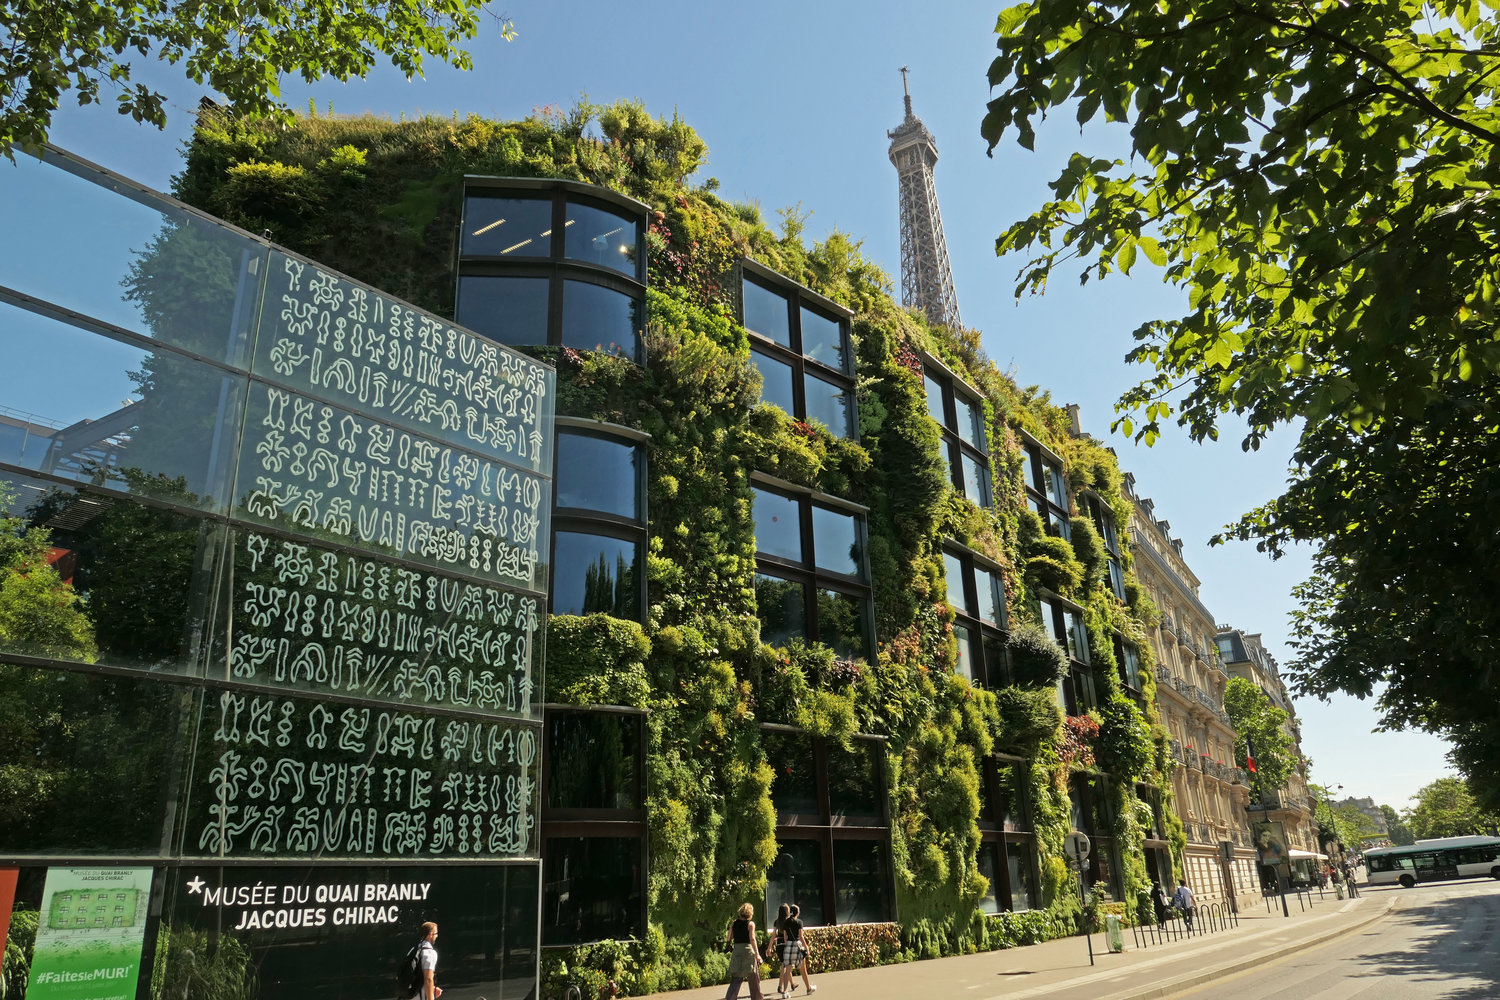 Plant wall of Paris Musium of Science and Industry by Patrick Blanc.